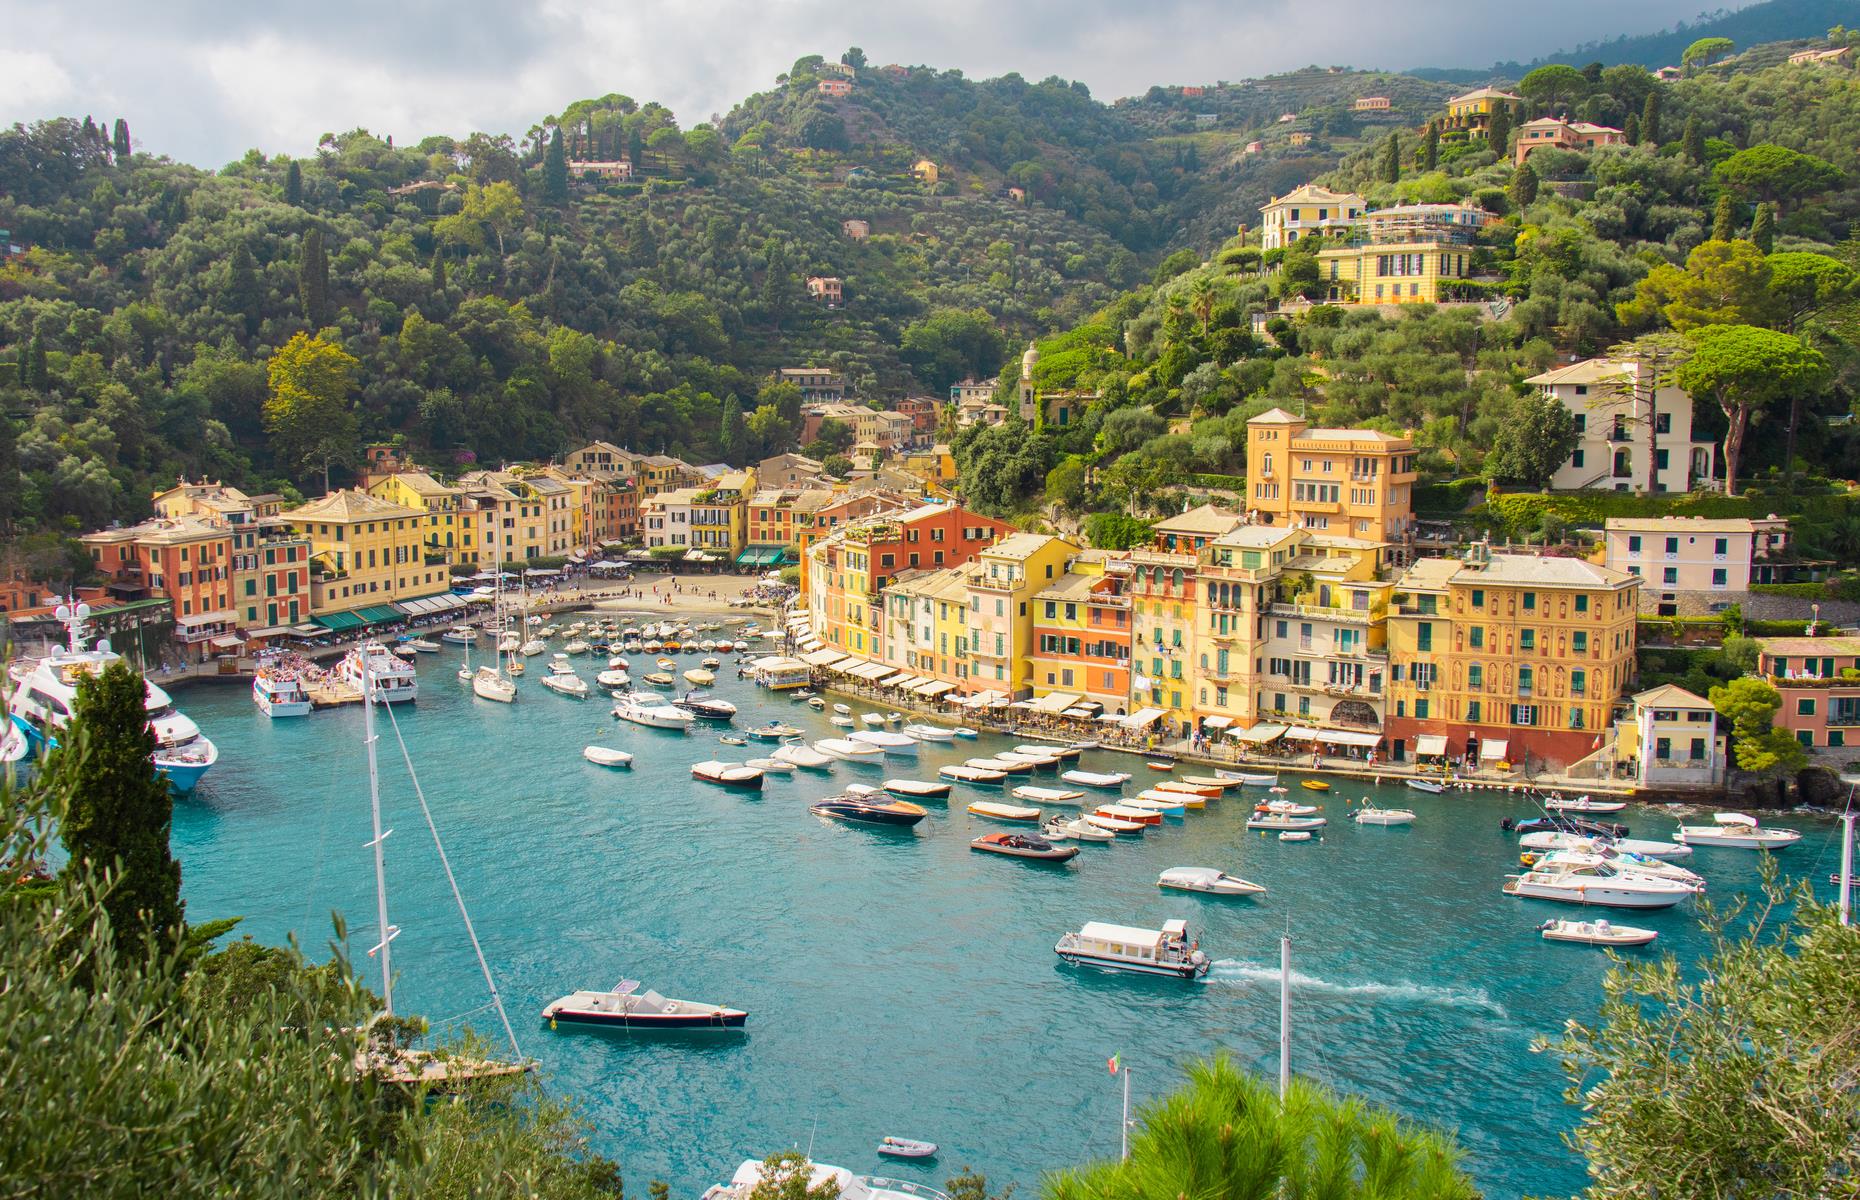 <p>A former fishing village turned fashionable port town, Portofino draws in visitors with its pretty pastel-coloured houses and honeysuckle-clad hills overlooking a dazzling harbour. Situated on its own peninsula on the northeast coast of Italy, it’s the perfect spot for panoramic views over the Italian Riviera. These are <a href="https://www.loveexploring.com/news/94624/stunning-images-of-europes-most-adorable-small-towns-and-villages">Europe's most charming towns and villages</a>.</p>